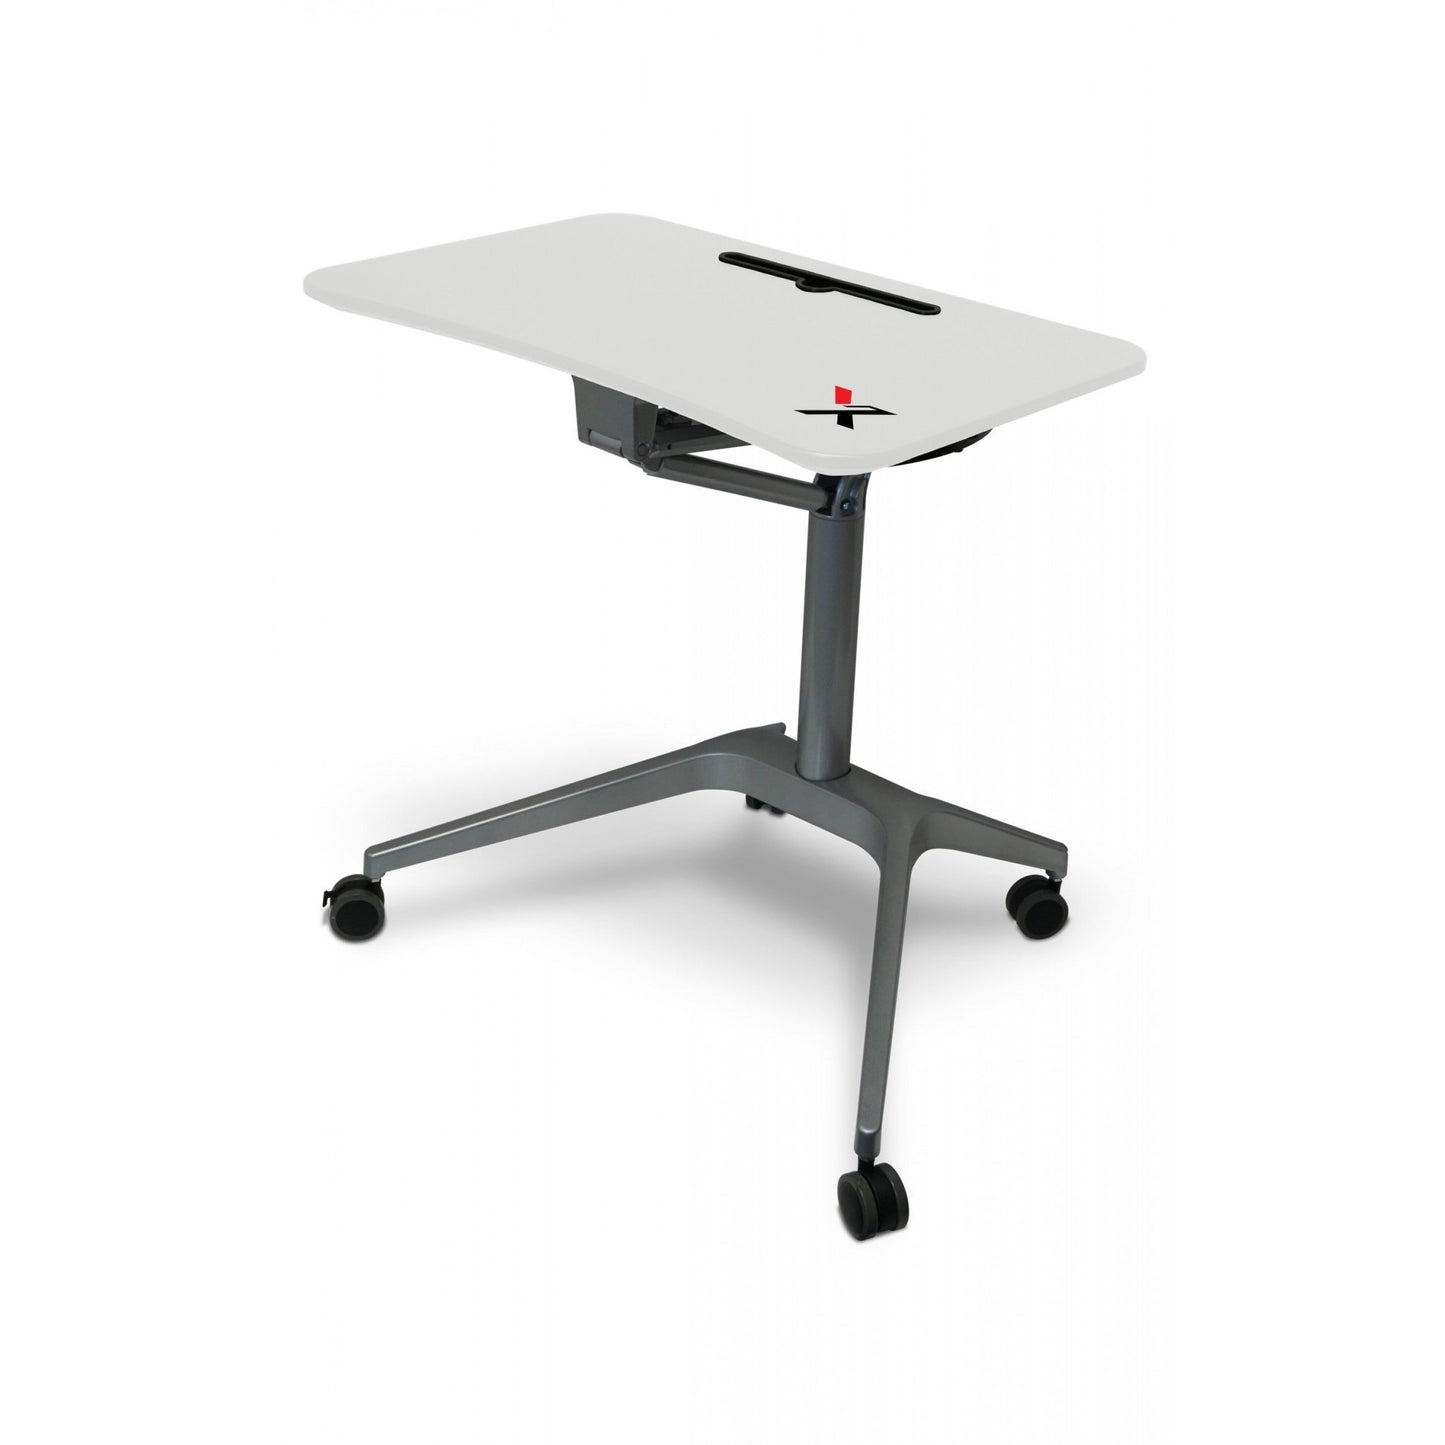 X-Table Mobile Height Adjustable Desk by XChair - Wholesale Office Furniture